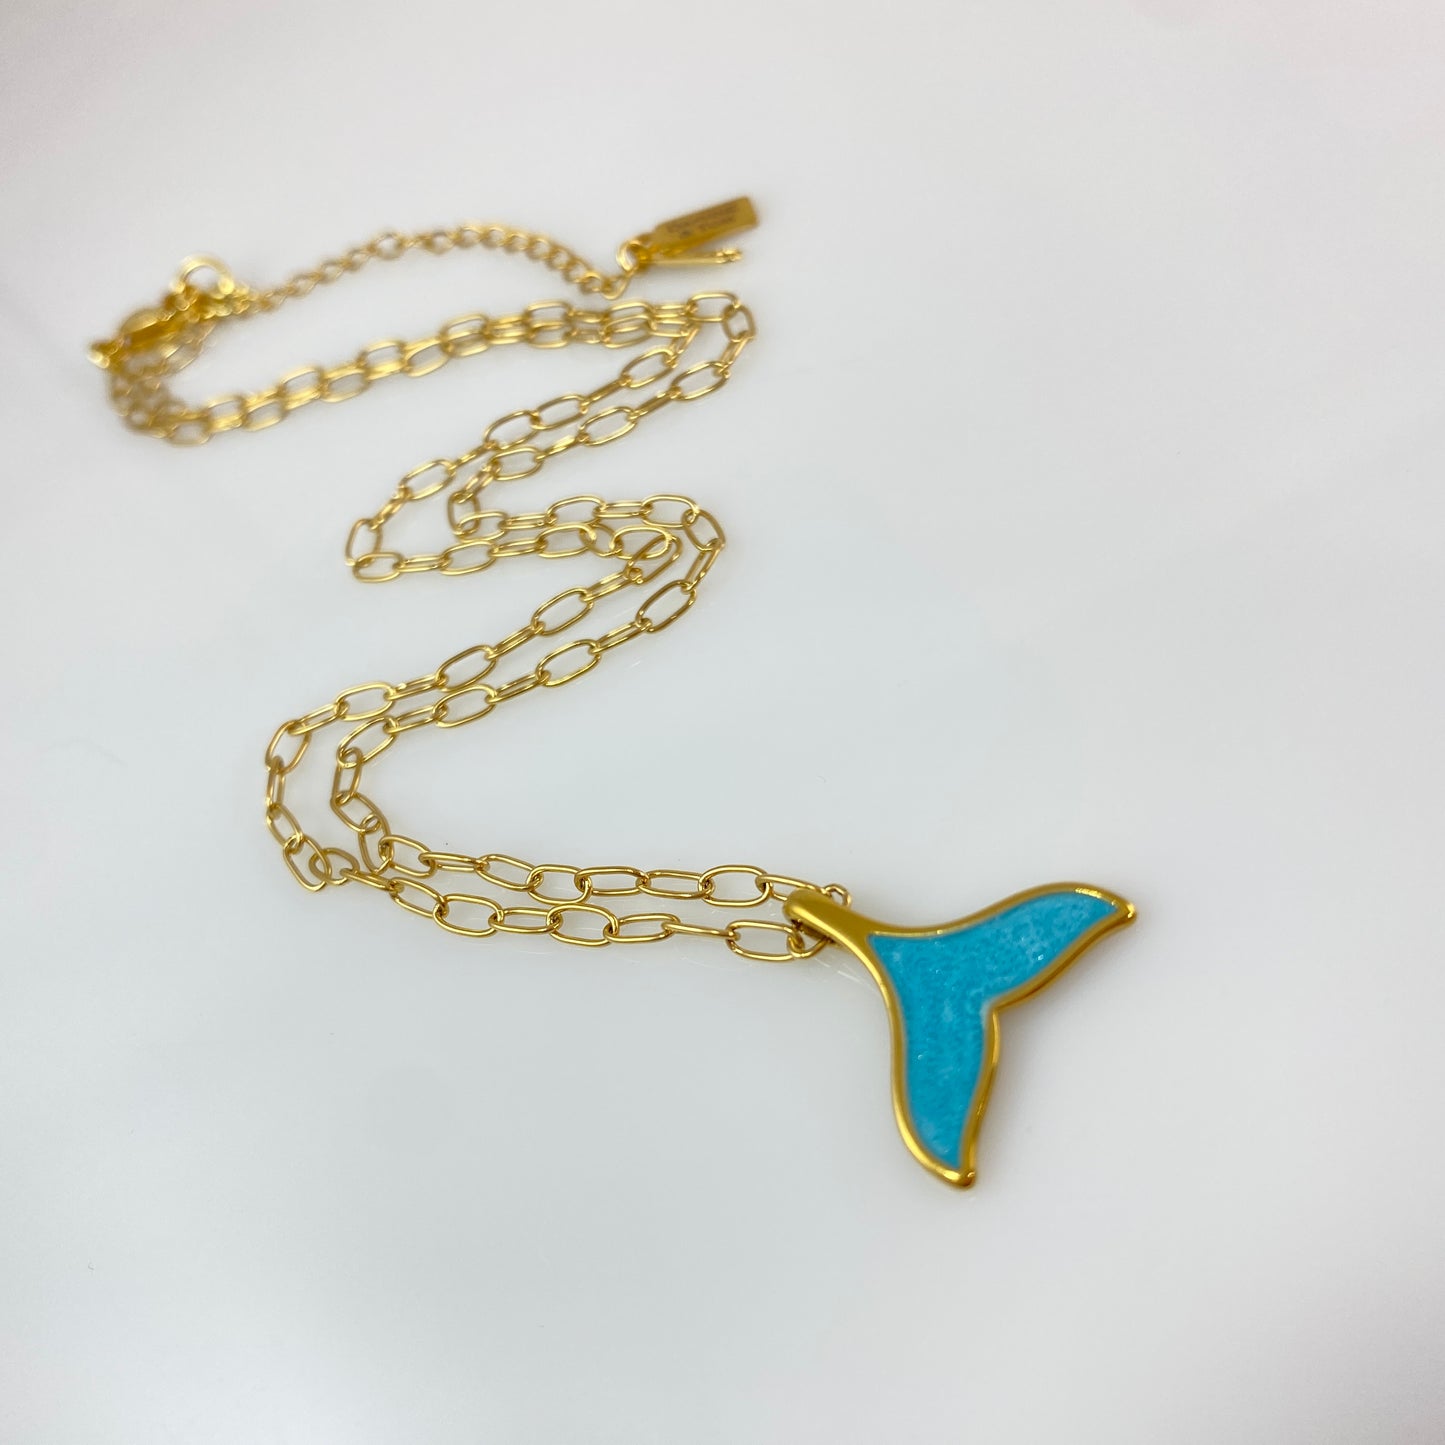 18 kt Gold Plated Enamel Whale Tail Pendant Necklace Paperclip Chain Stainless Steel